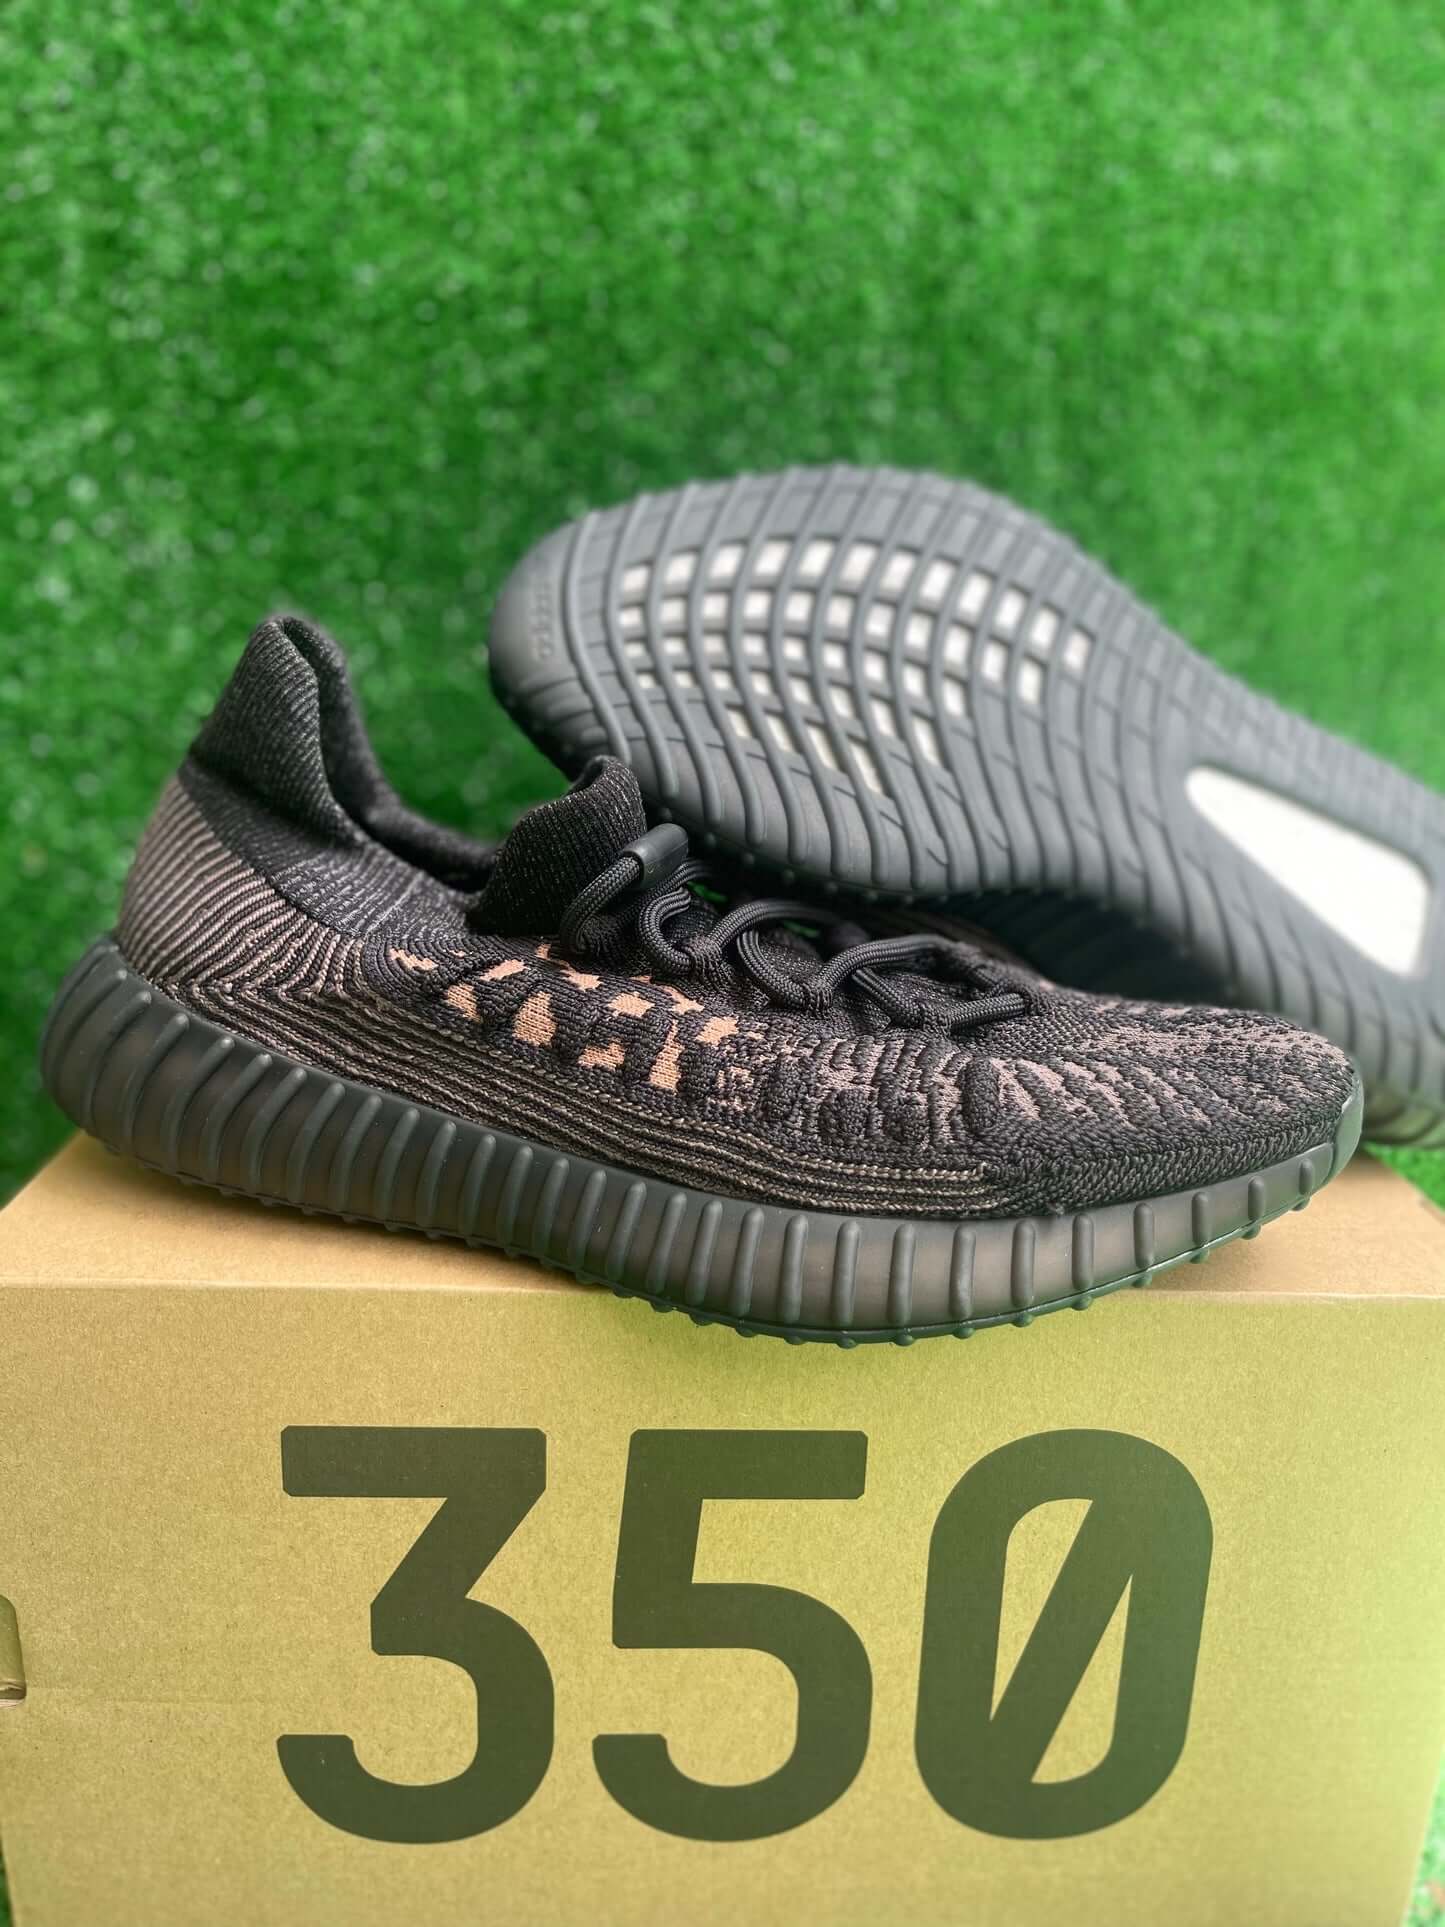 Adidas Yeezy Boost 350 V2 Cmpt Slate Carbon – The Gala Empire